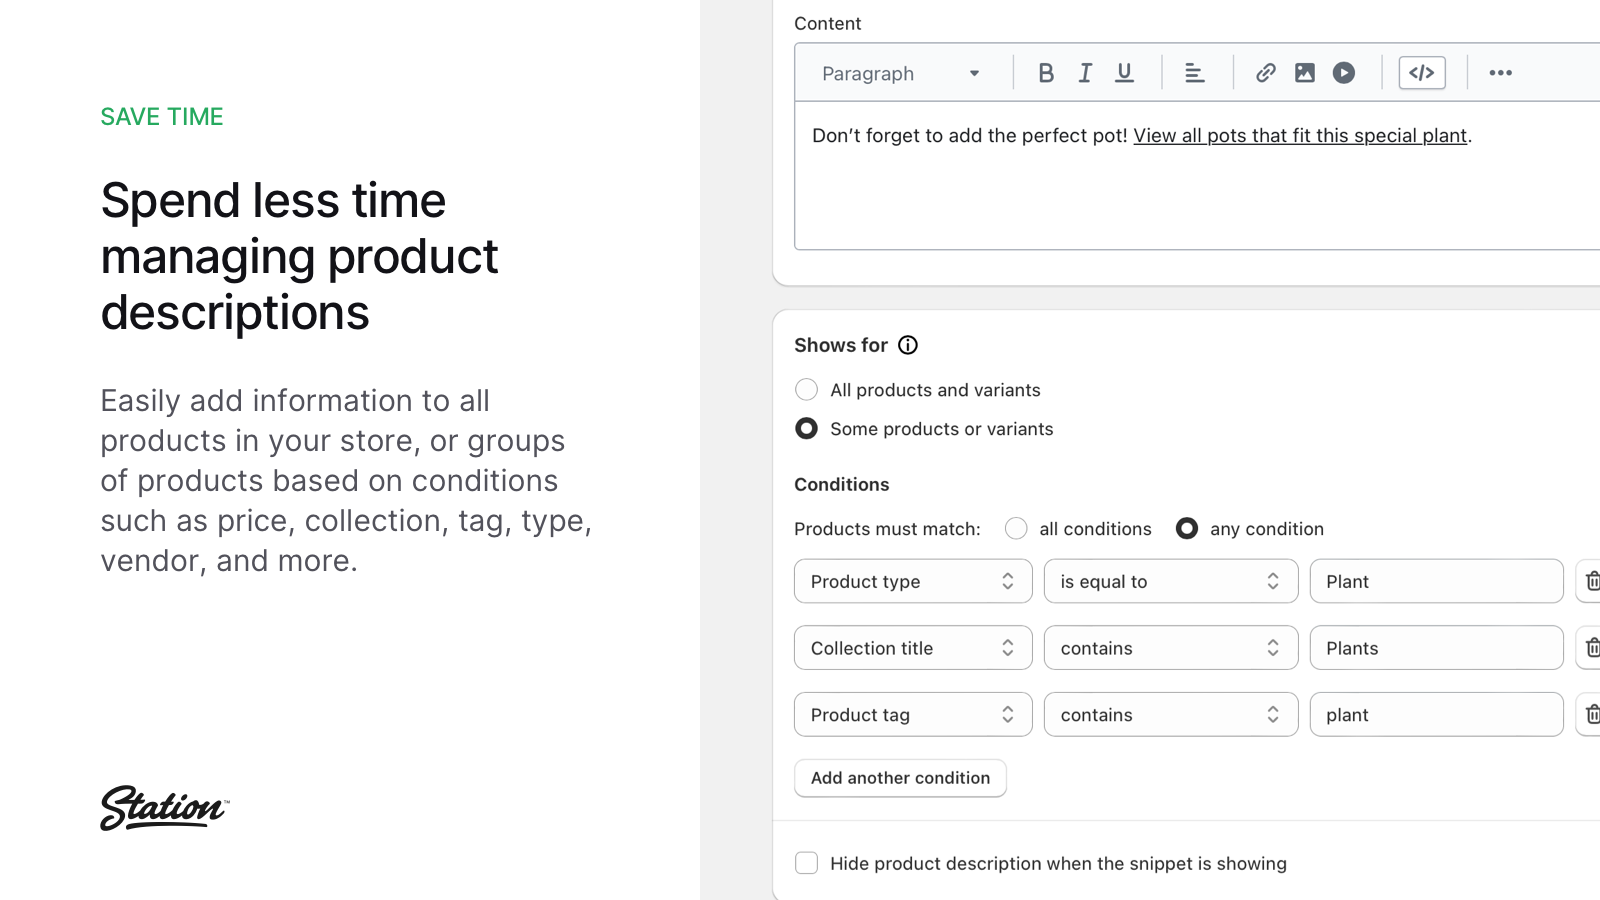 Spend less time managing product descriptions